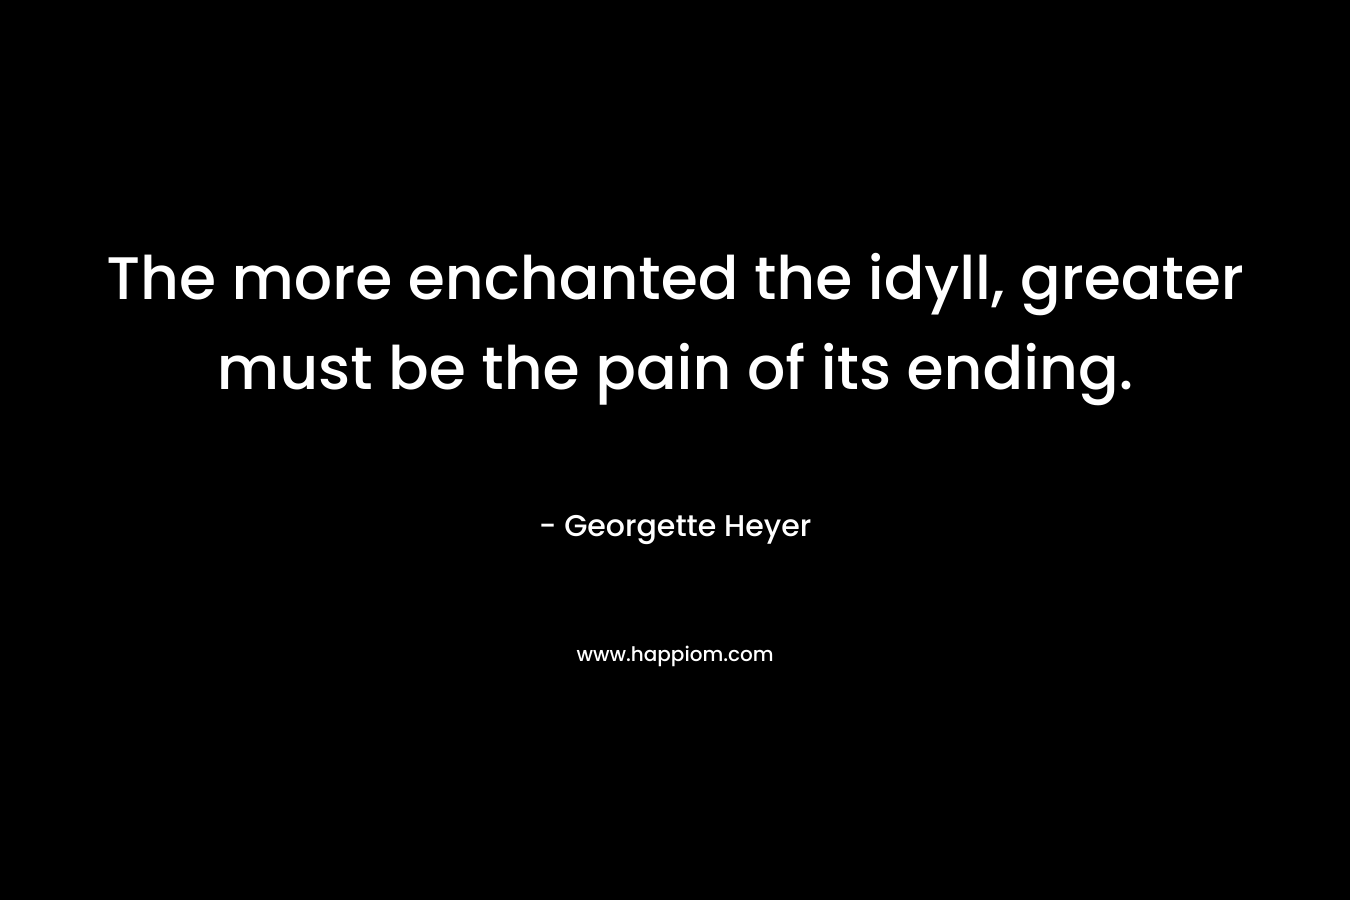 The more enchanted the idyll, greater must be the pain of its ending. – Georgette Heyer